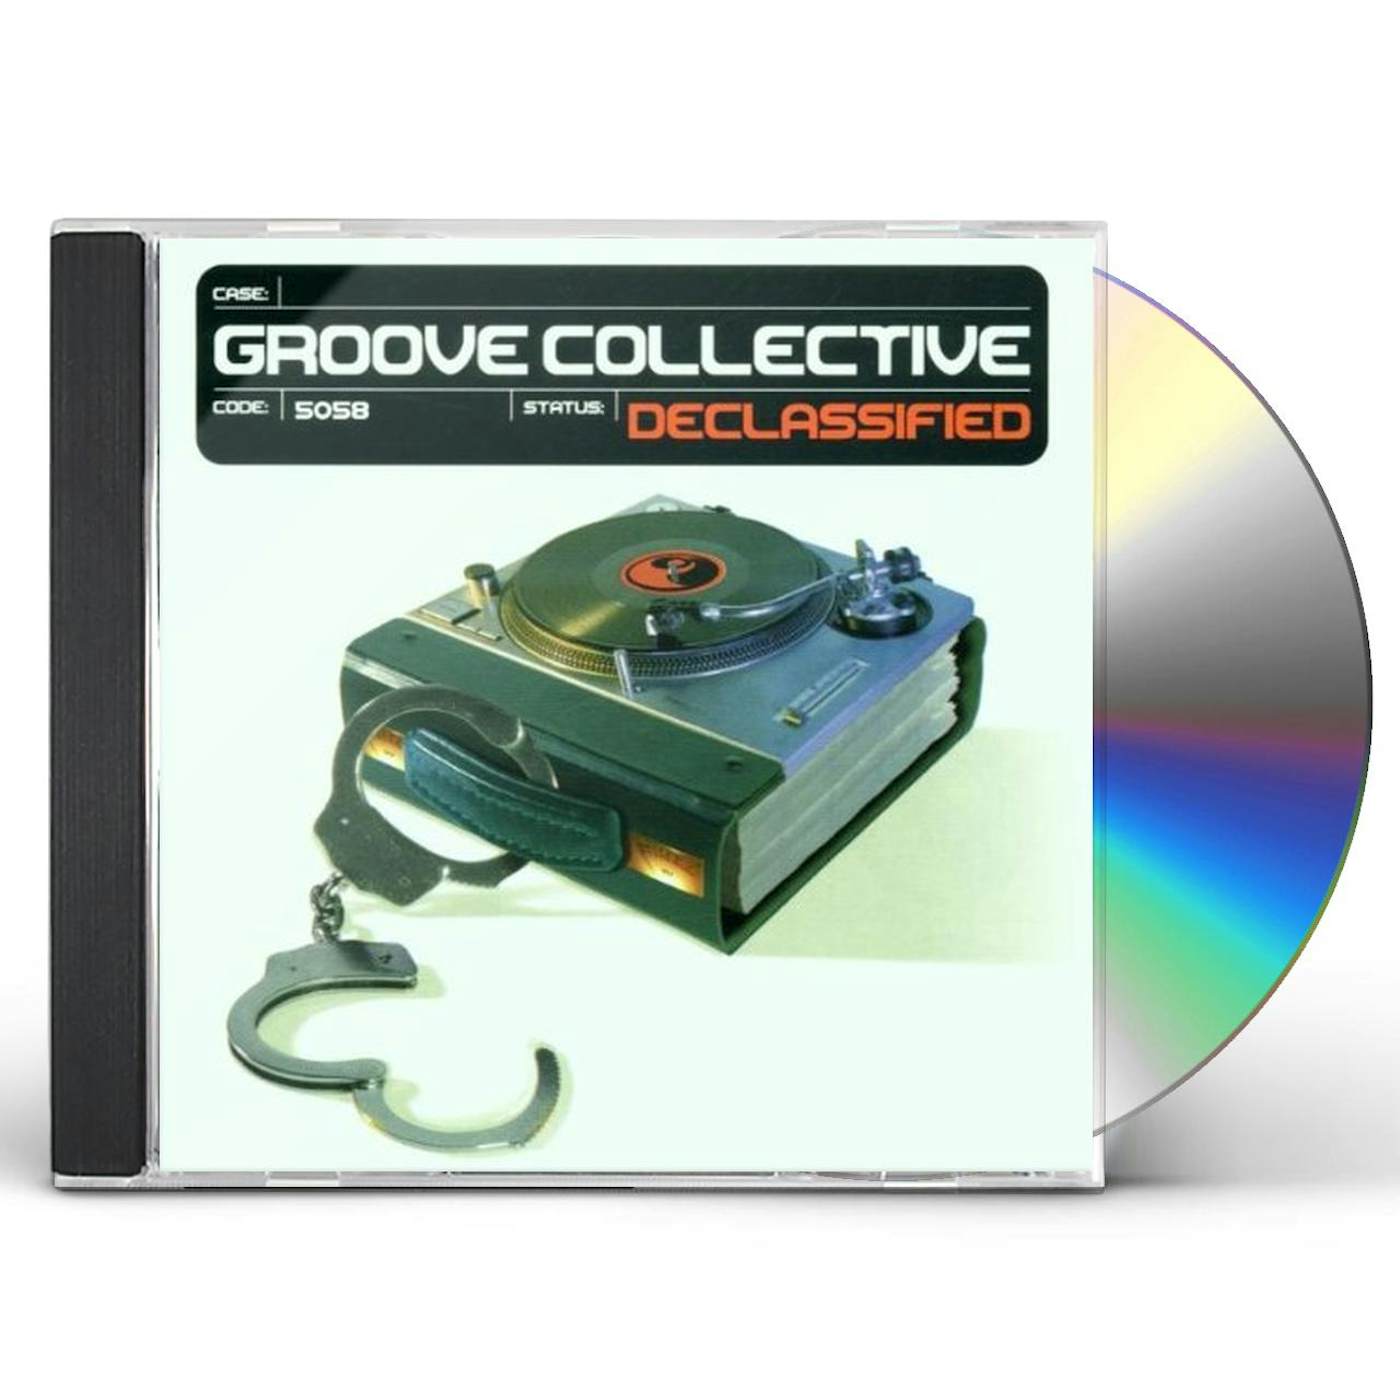 Groove Collective DECLASSIFIED CD